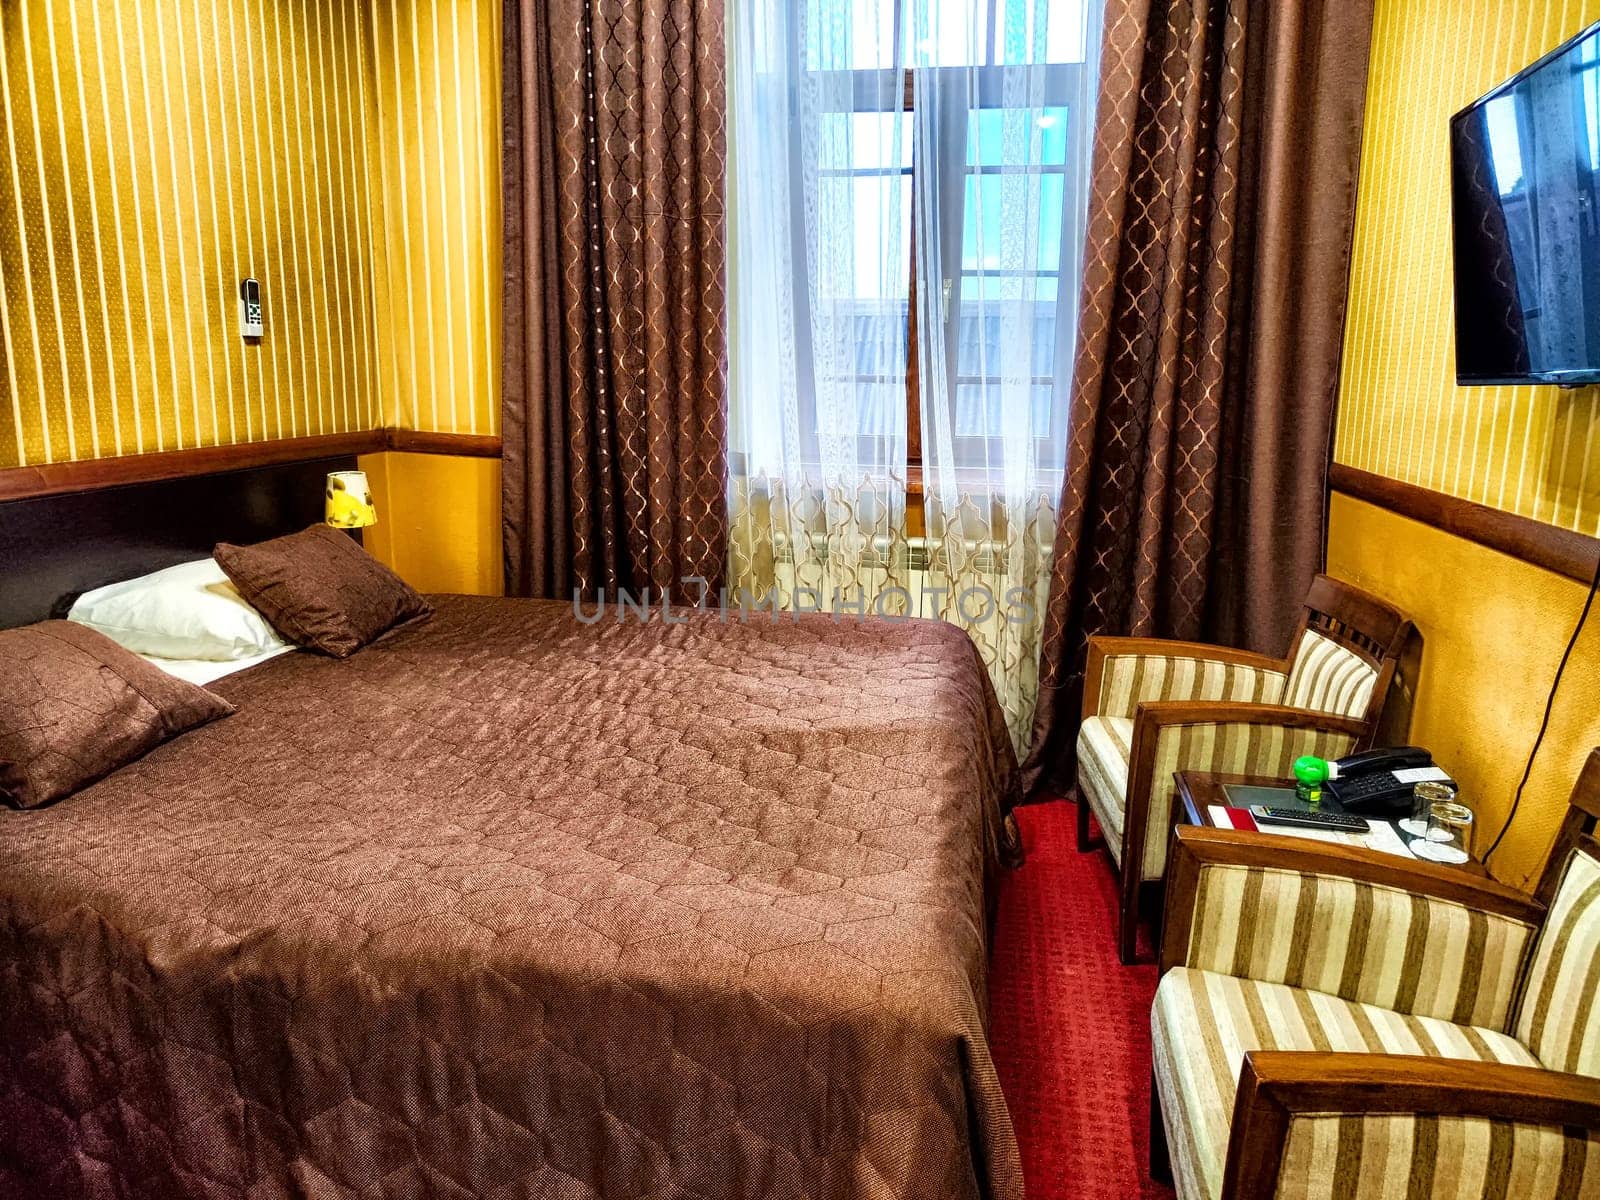 Well-appointed hotel room with plush bedding and classic design.